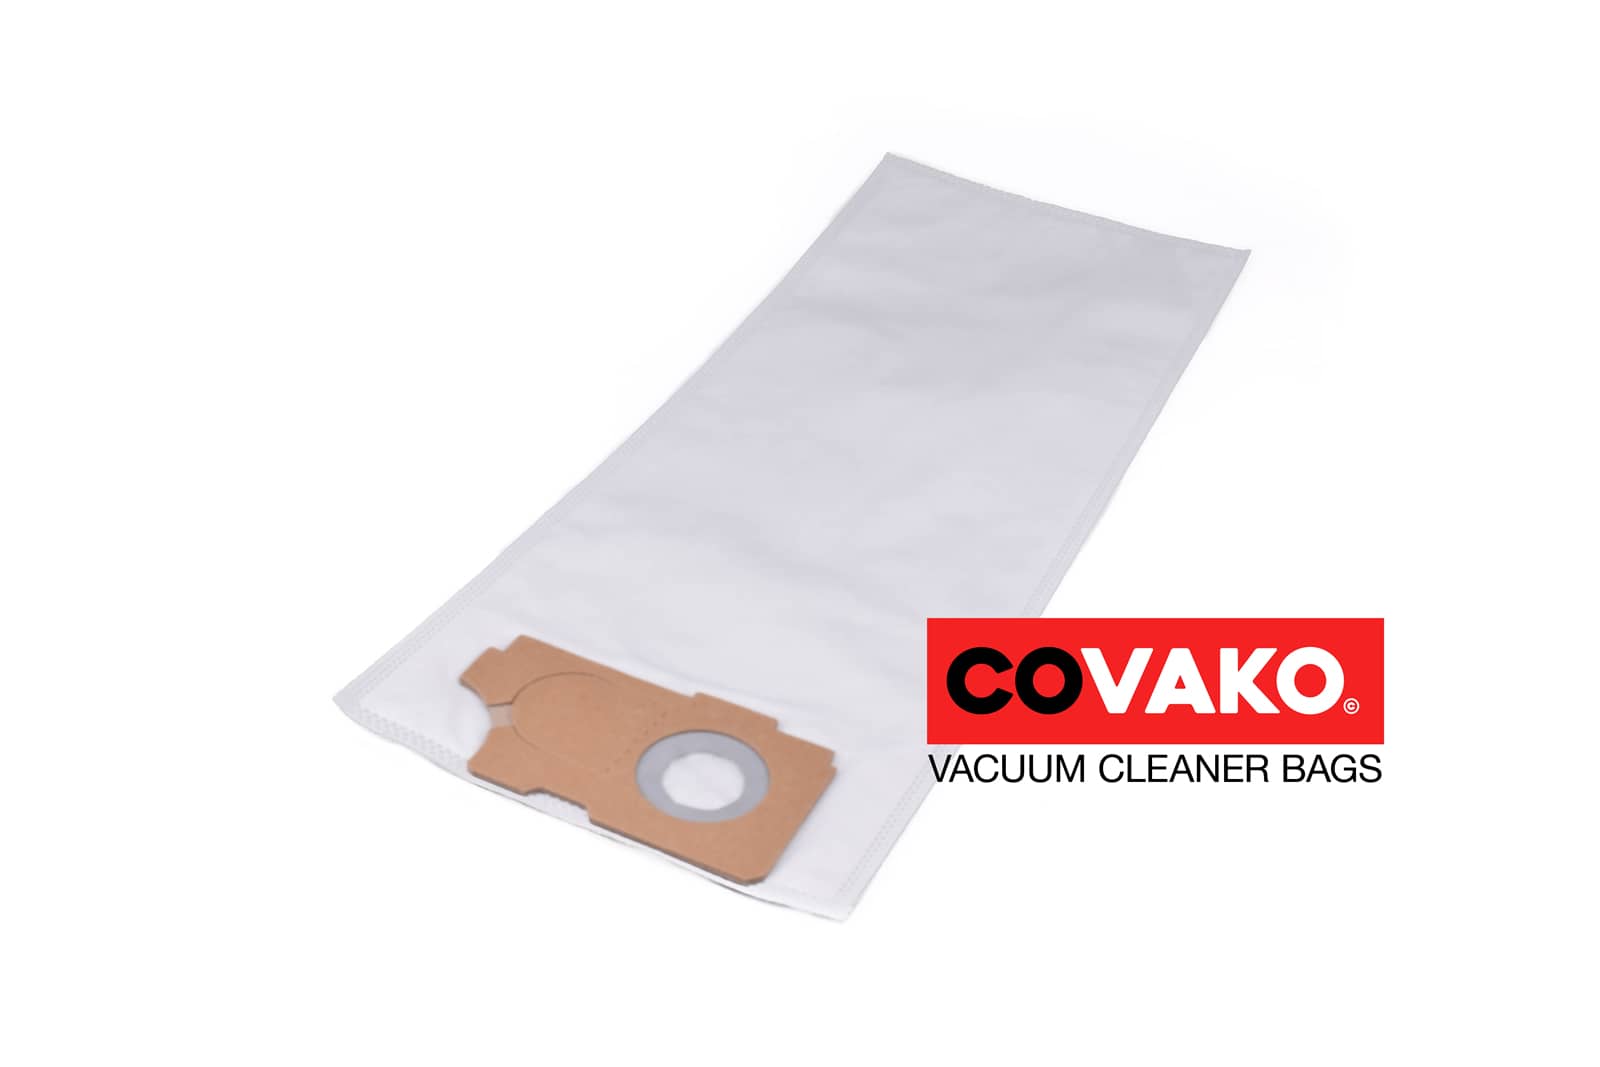 Oehme Otto Comfort 36 / Synthesis - Oehme Otto vacuum cleaner bags